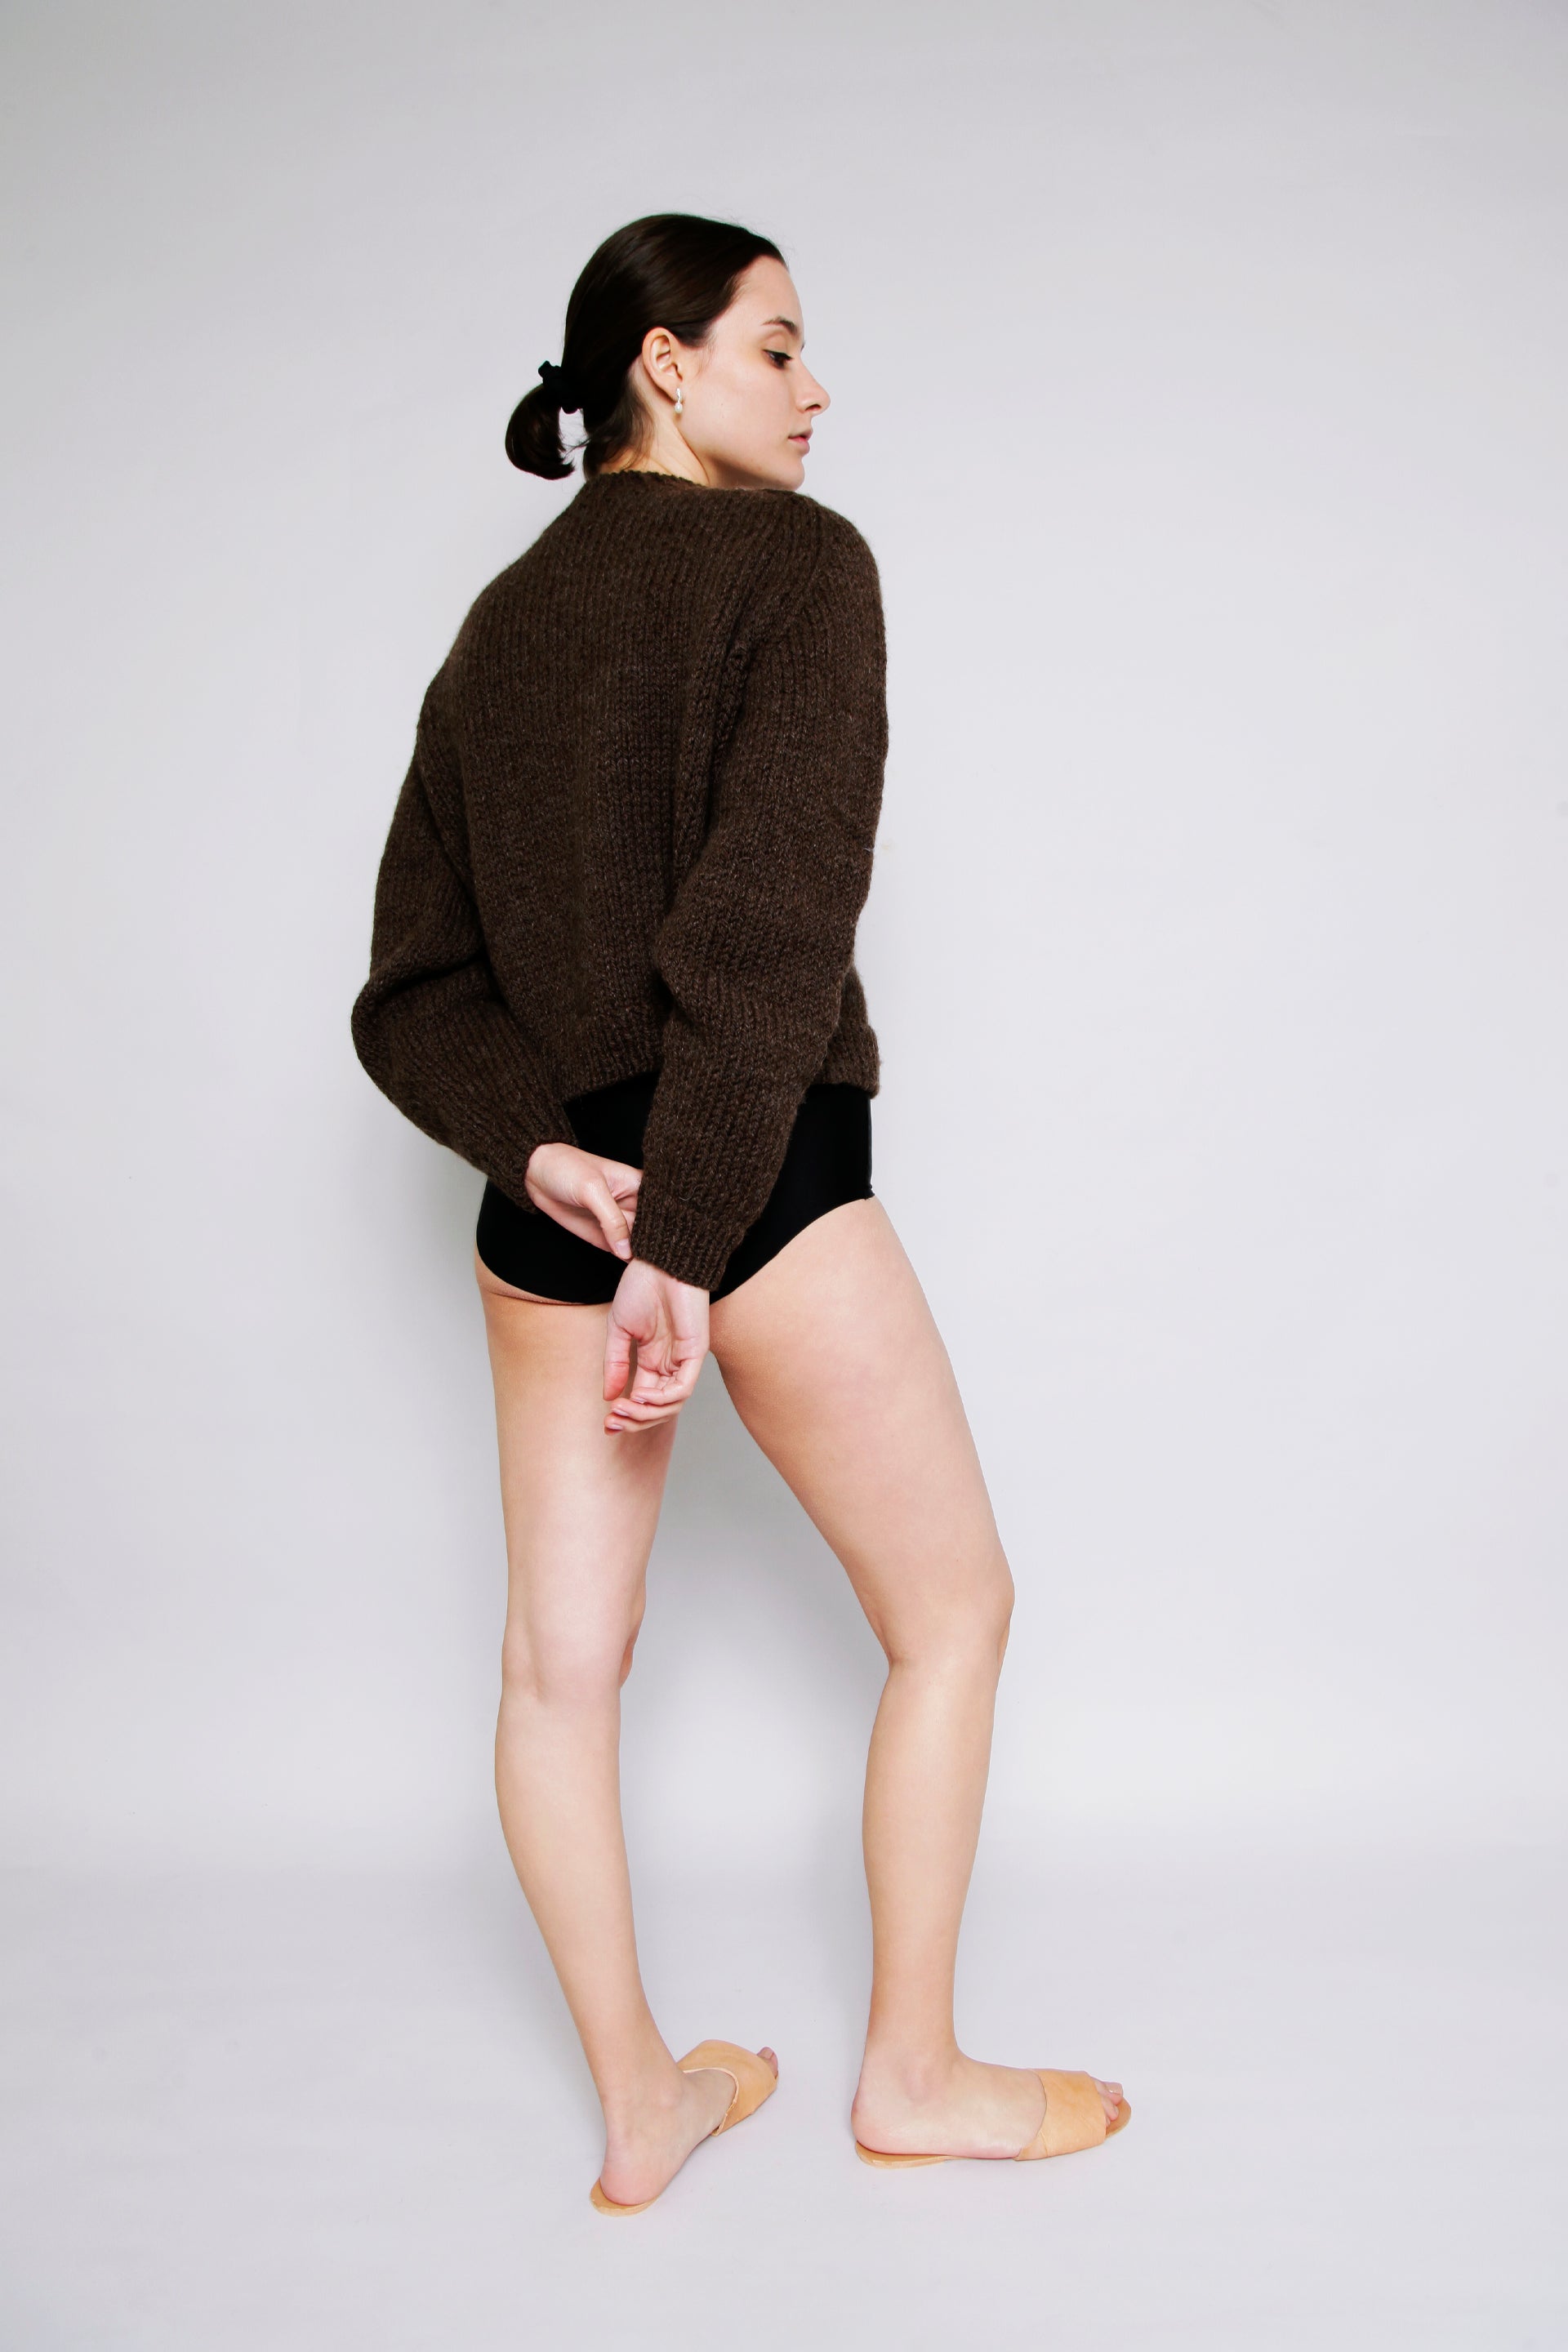 UNDYED, WOOL, HAND-KNITTED, JUMPER, SWEATER, STYLISH, SUSTAINABLE, HAND-CRAFTED, WOMENSWEAR